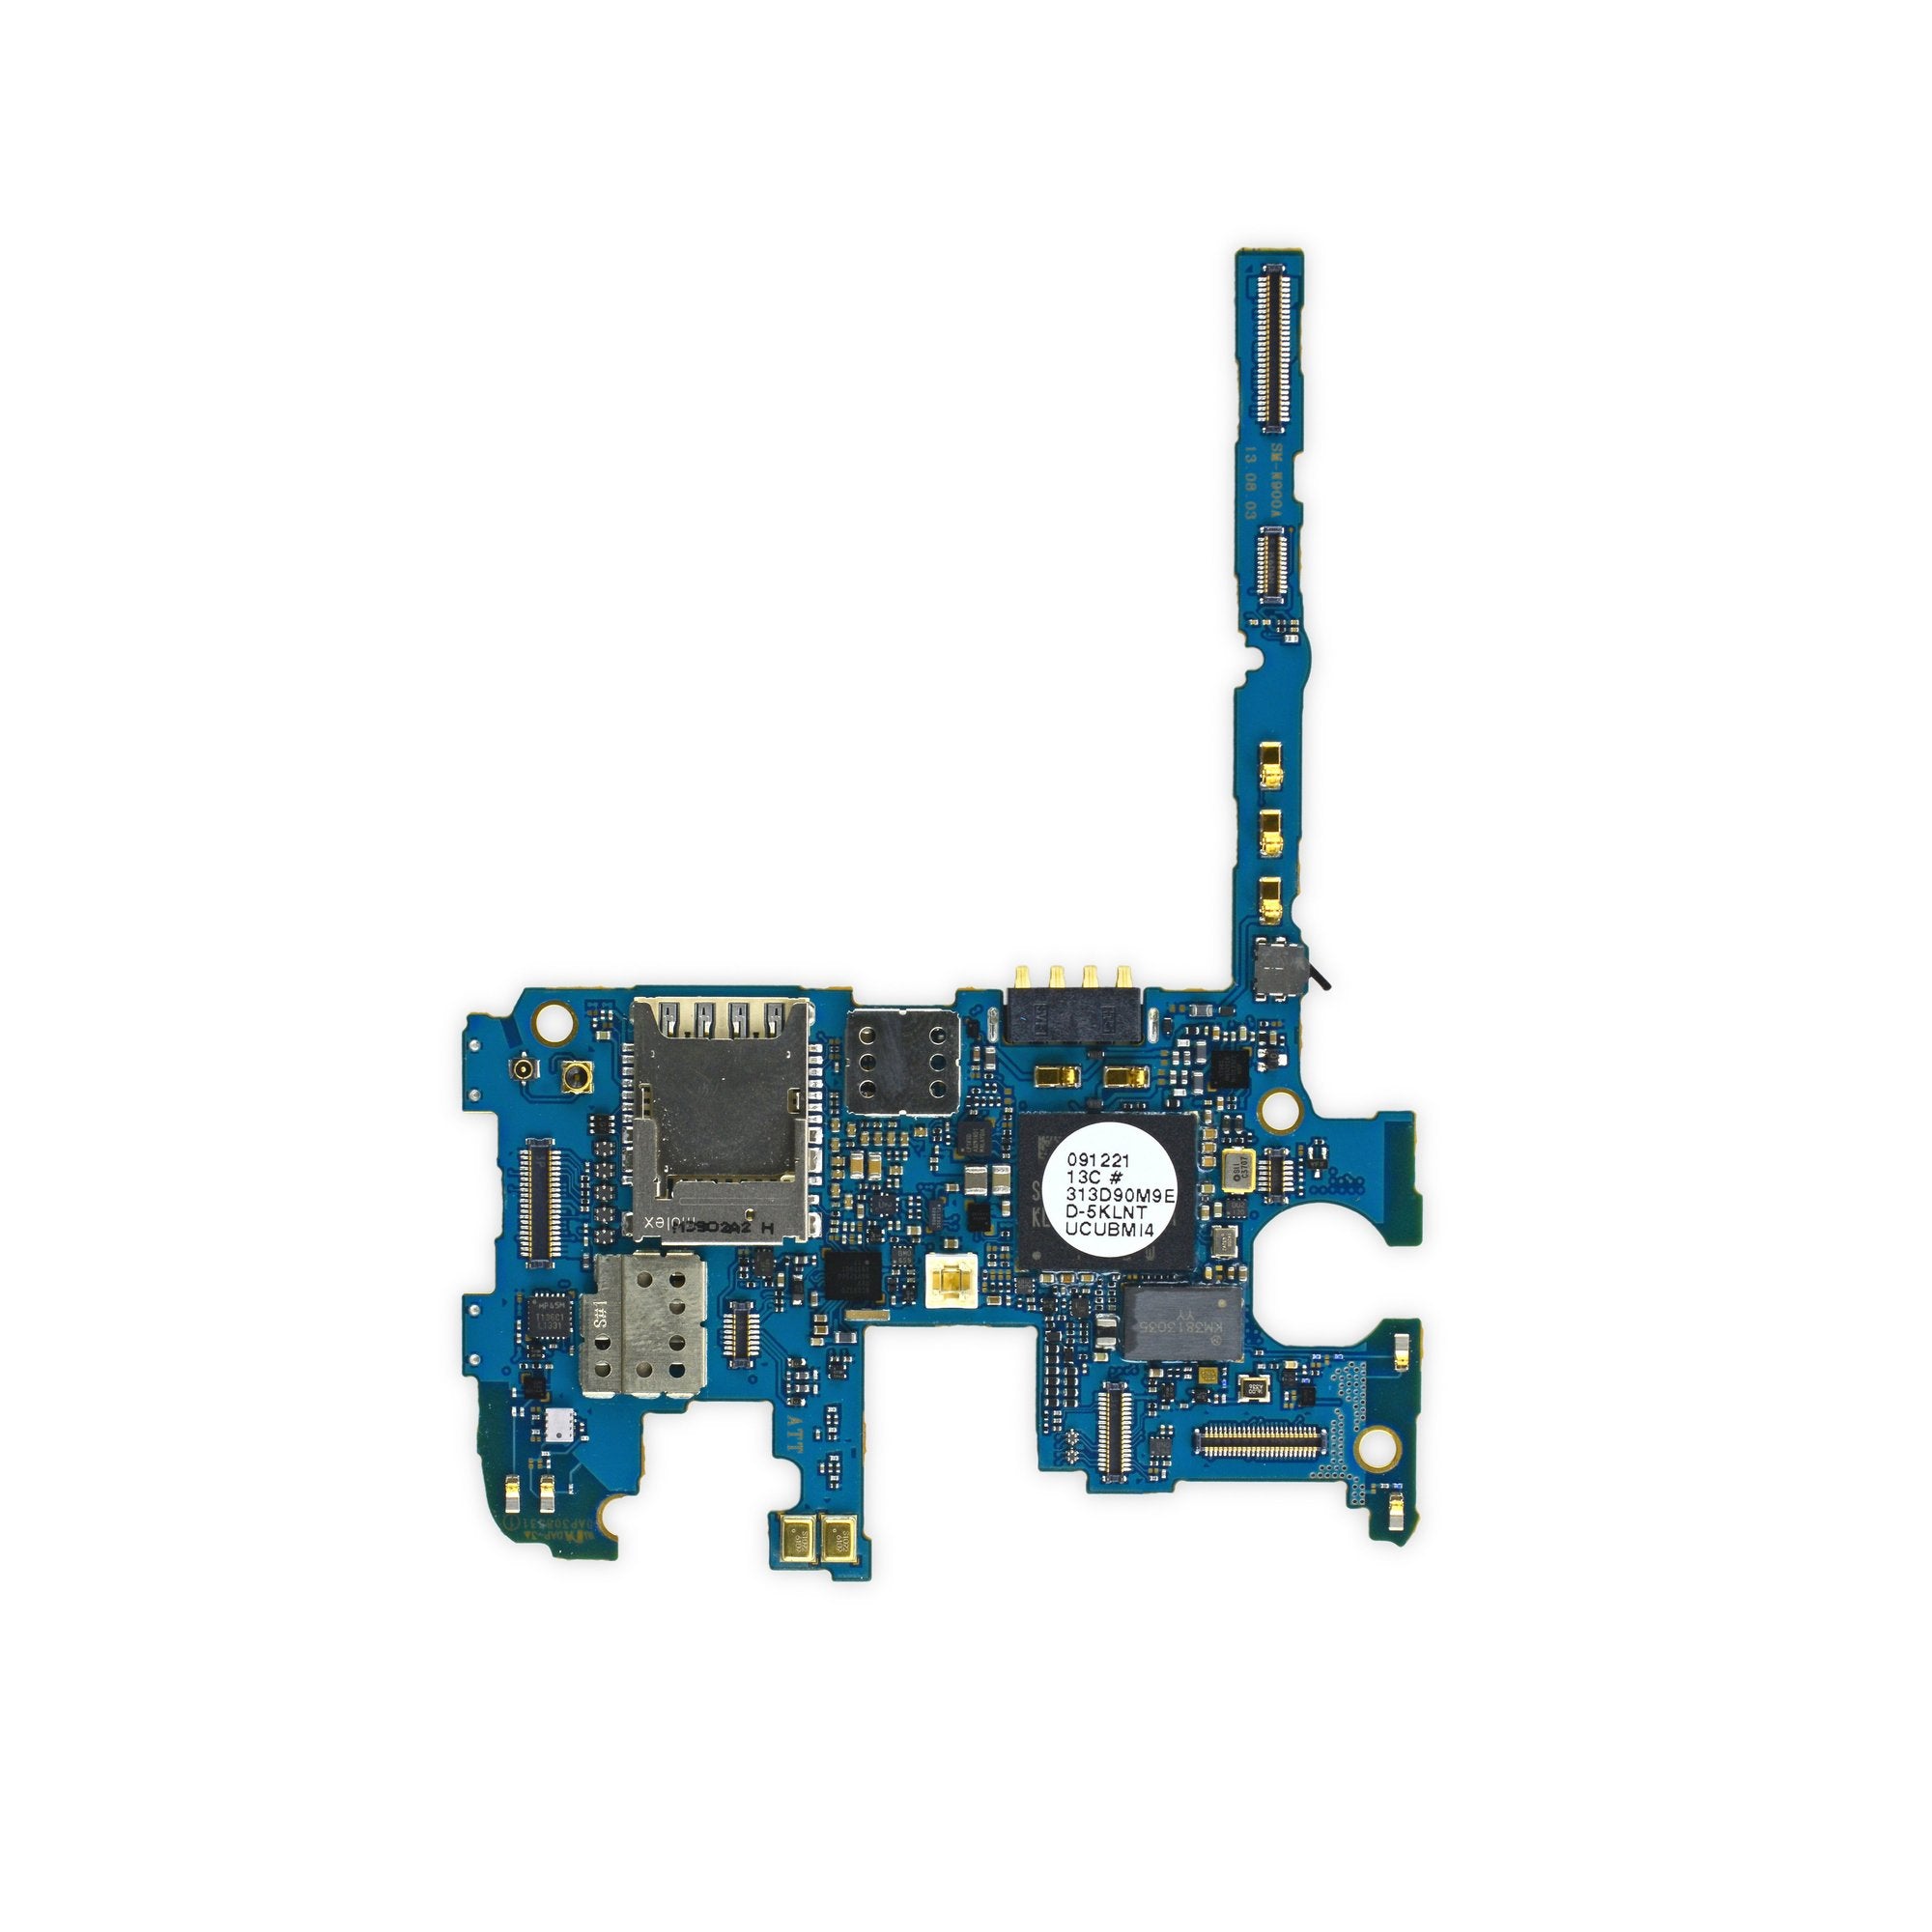 Galaxy Note 3 (AT&T) Motherboard 16 GB Used